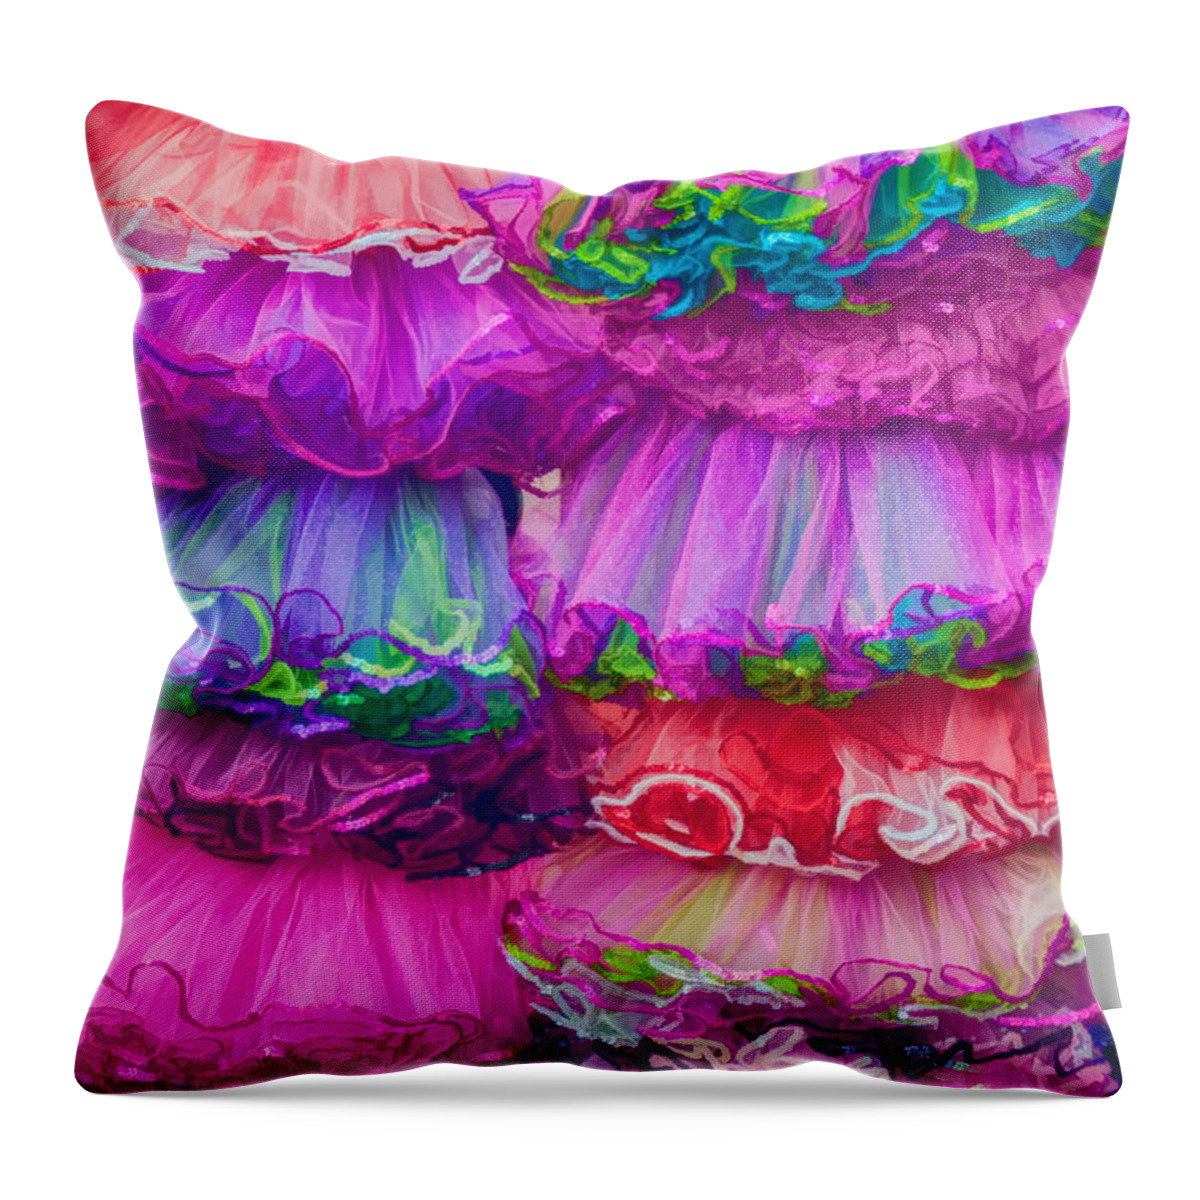 Tutu Throw Pillow featuring the photograph Tutus by the Dozen by Kathleen K Parker